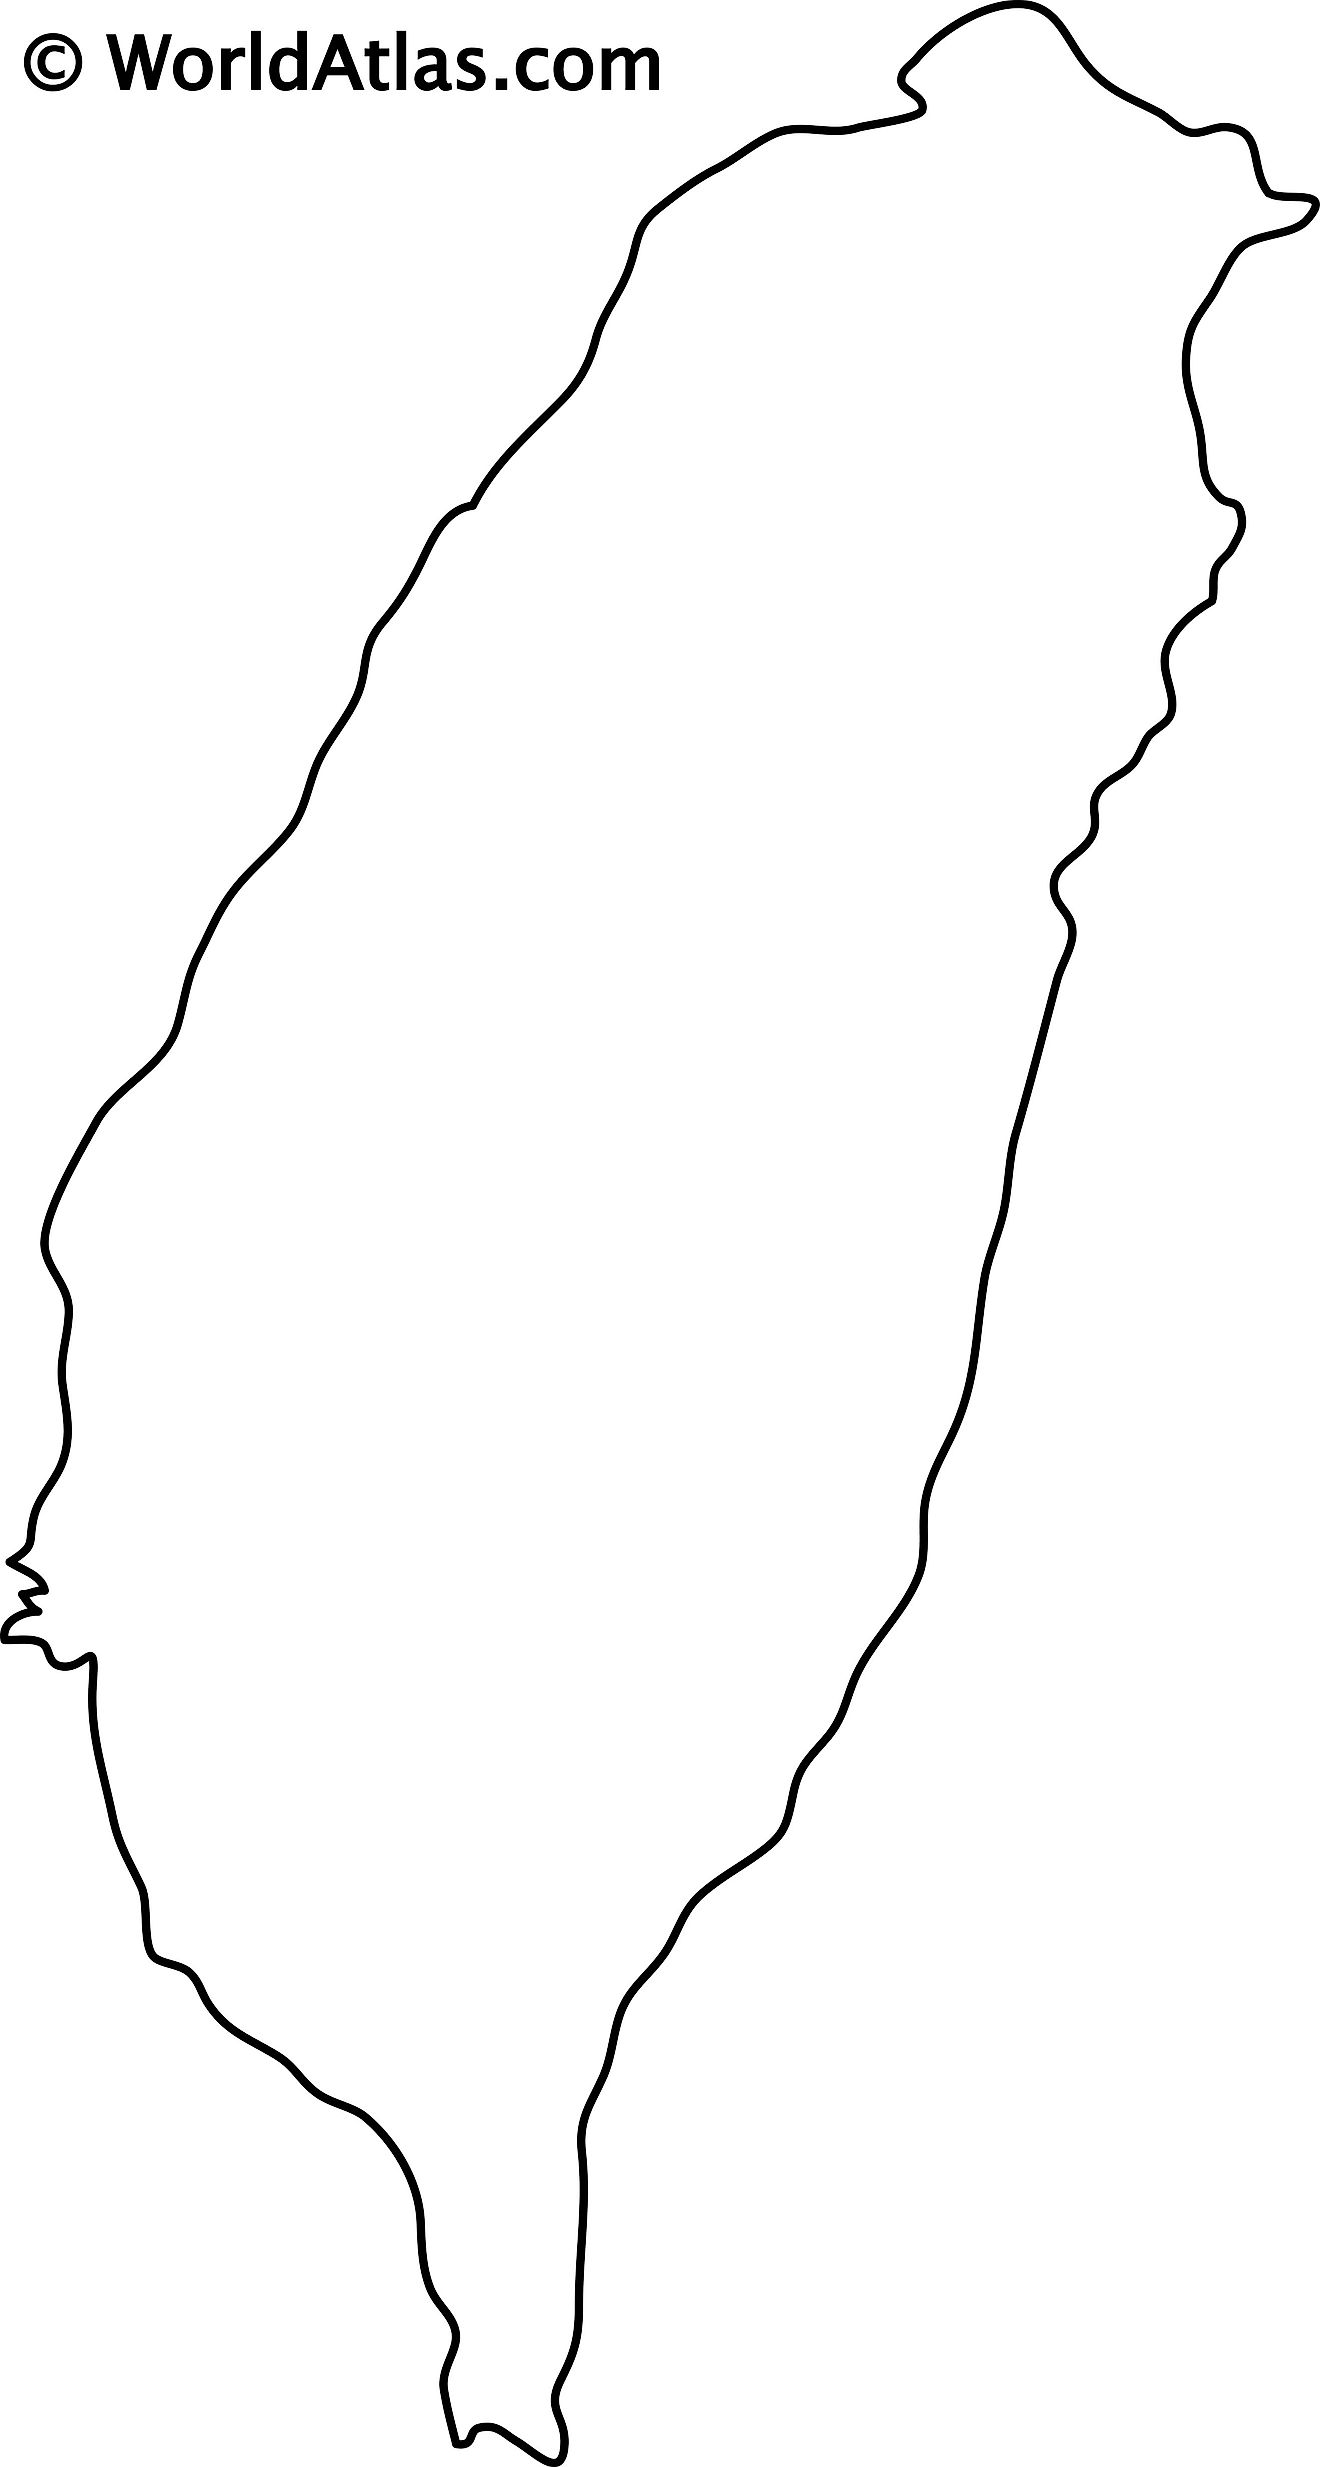 Blank Outline Map of Taiwan